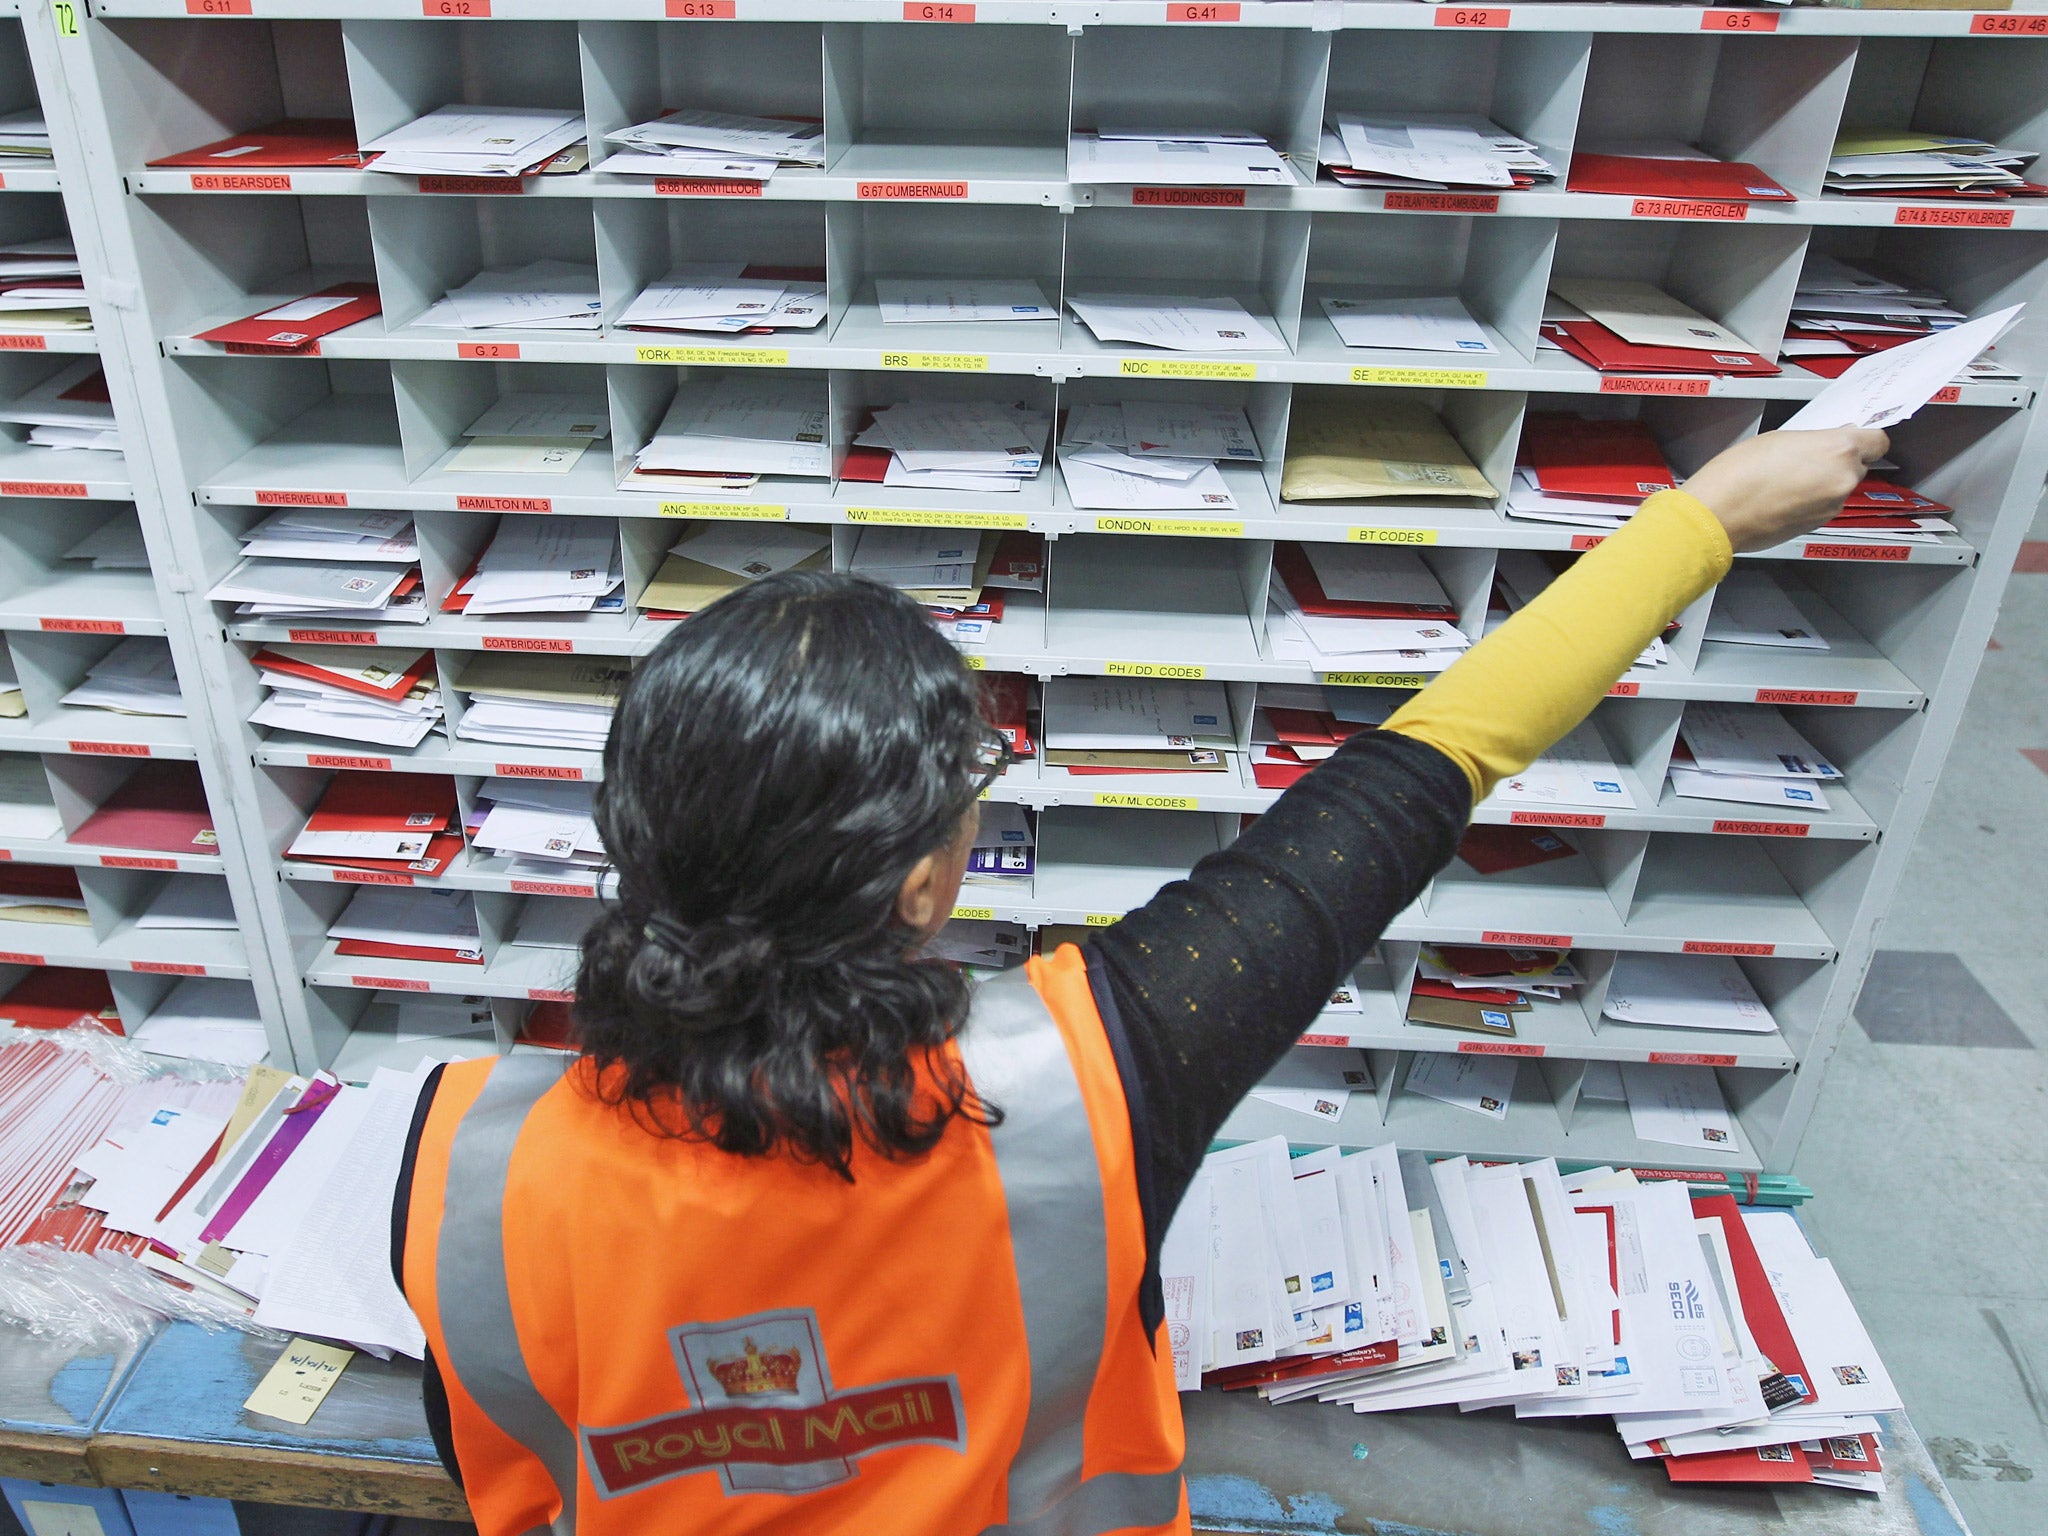 Whistl will still handle the collection and sorting of mail.